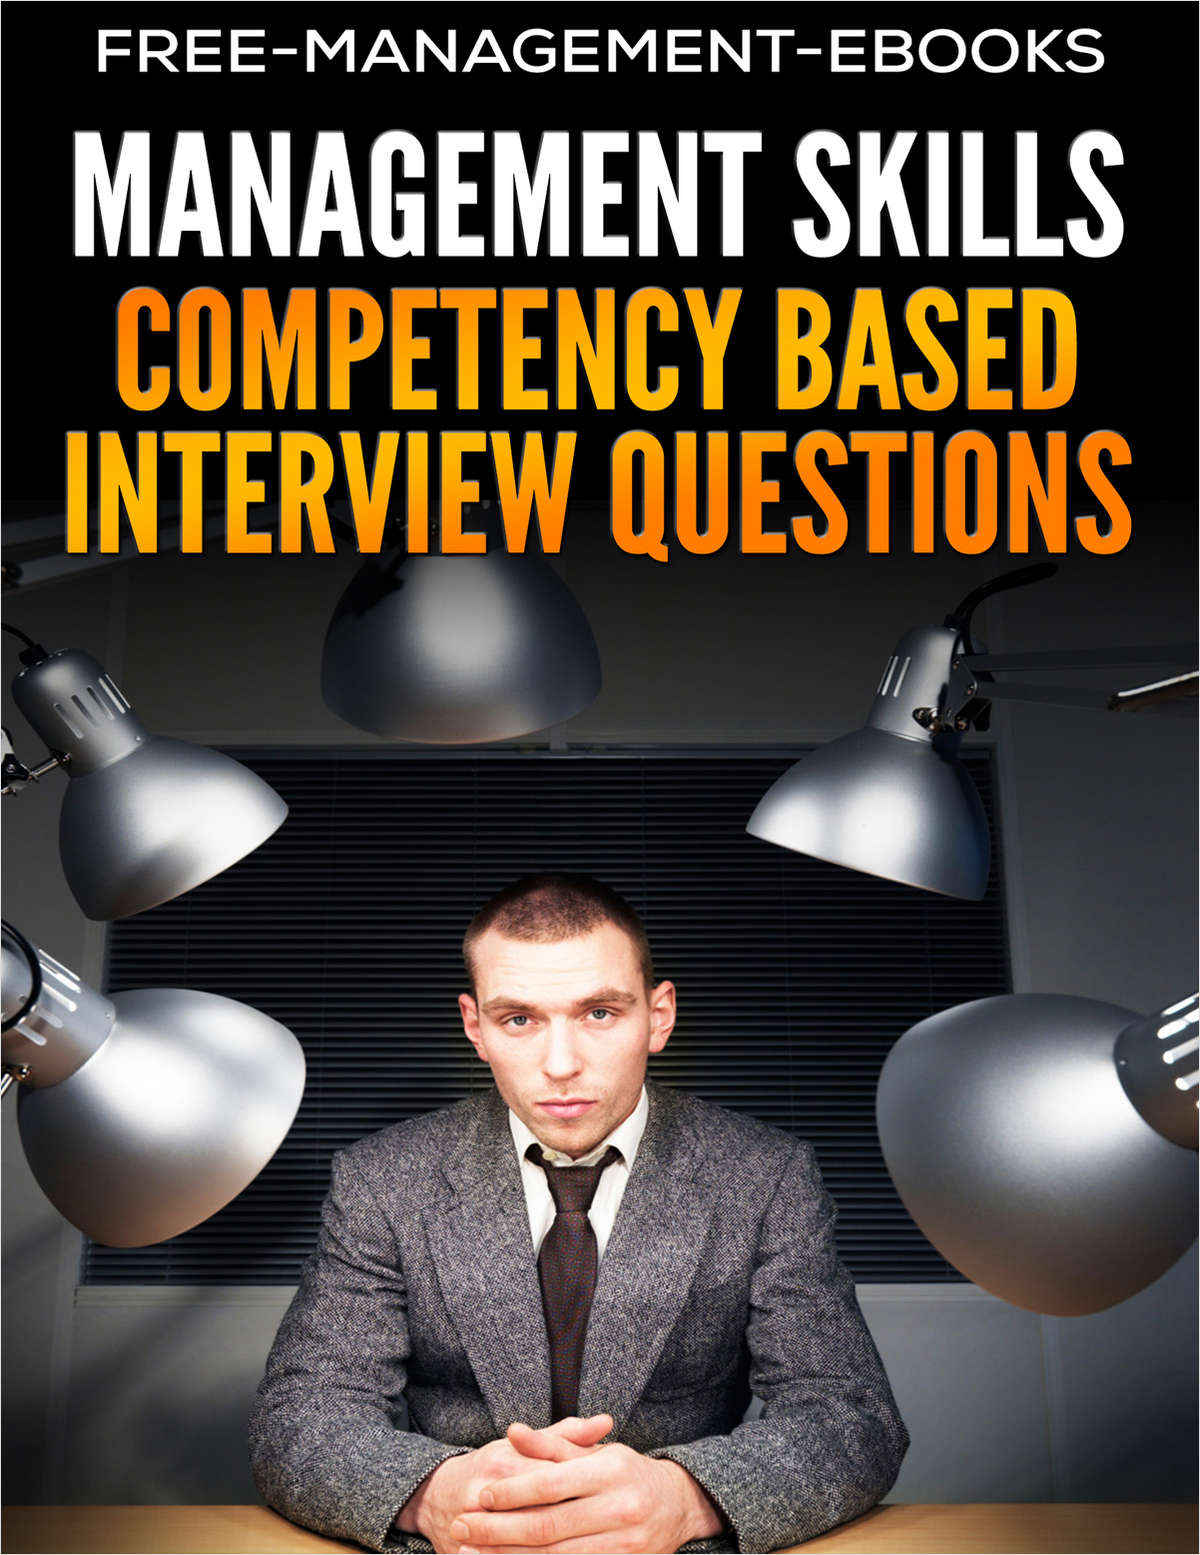 Competency-Based Interview Questions - Management Skills